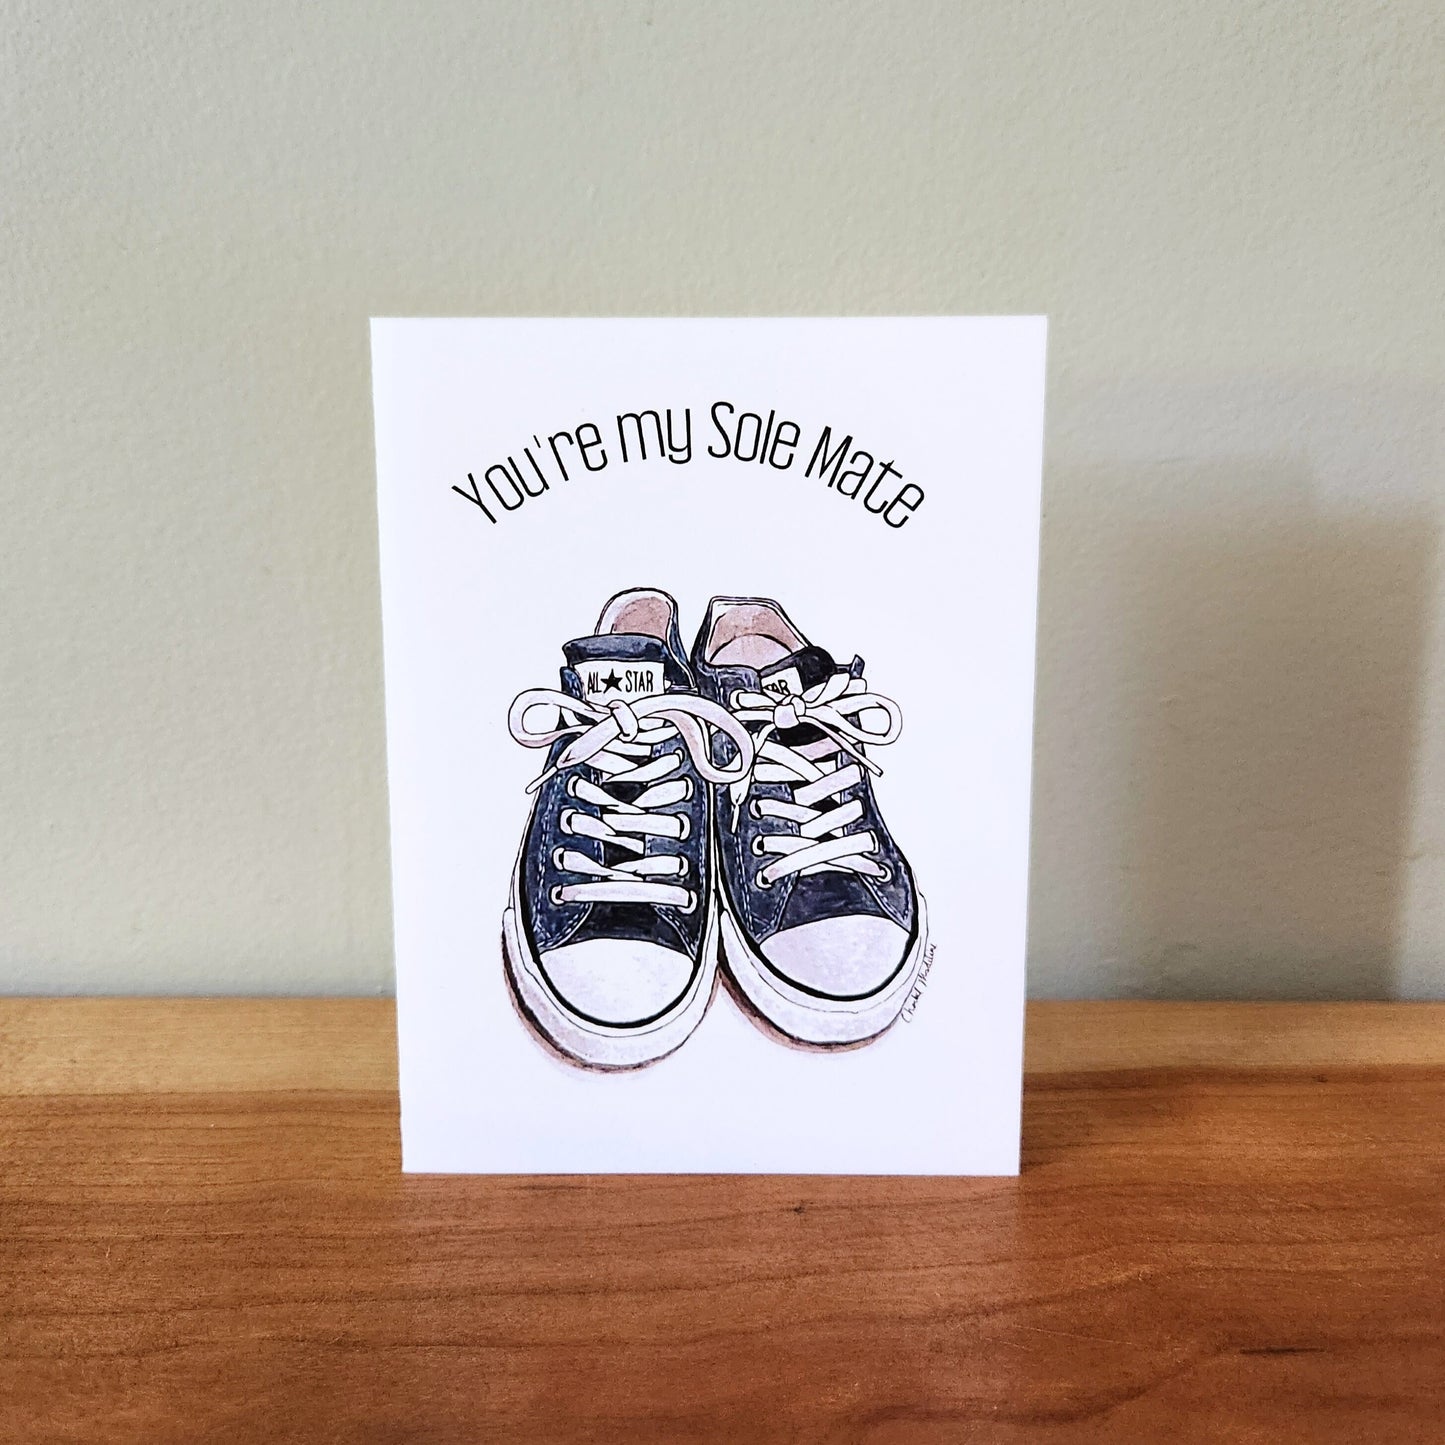 You're my sole mate, Blue running shoes birthday card, Sneaker pun love anniversary card for girlfriend, boyfriend, husband, Partner, Wife